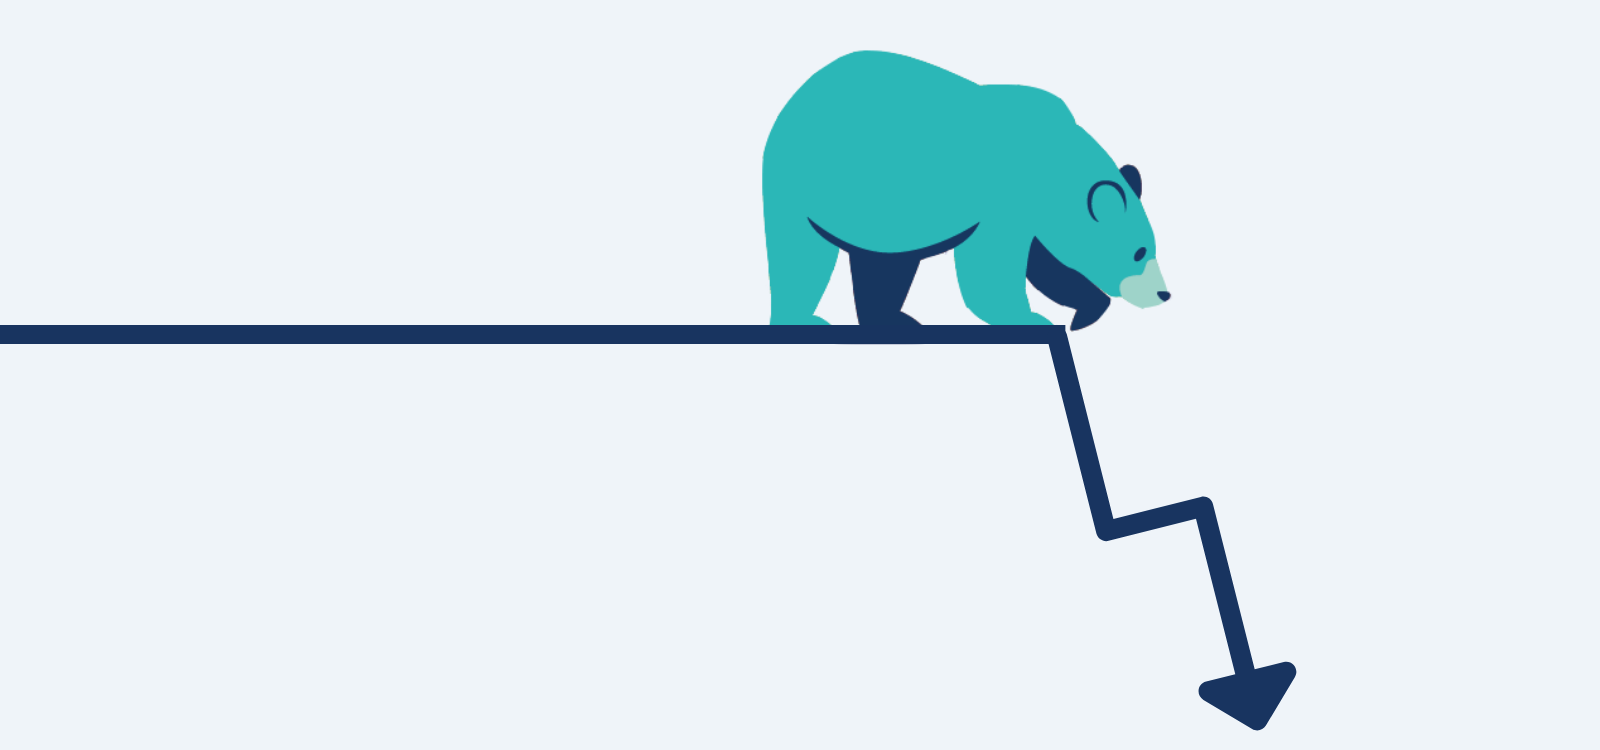 5 Ways To Prepare Your Business for a Bear Market